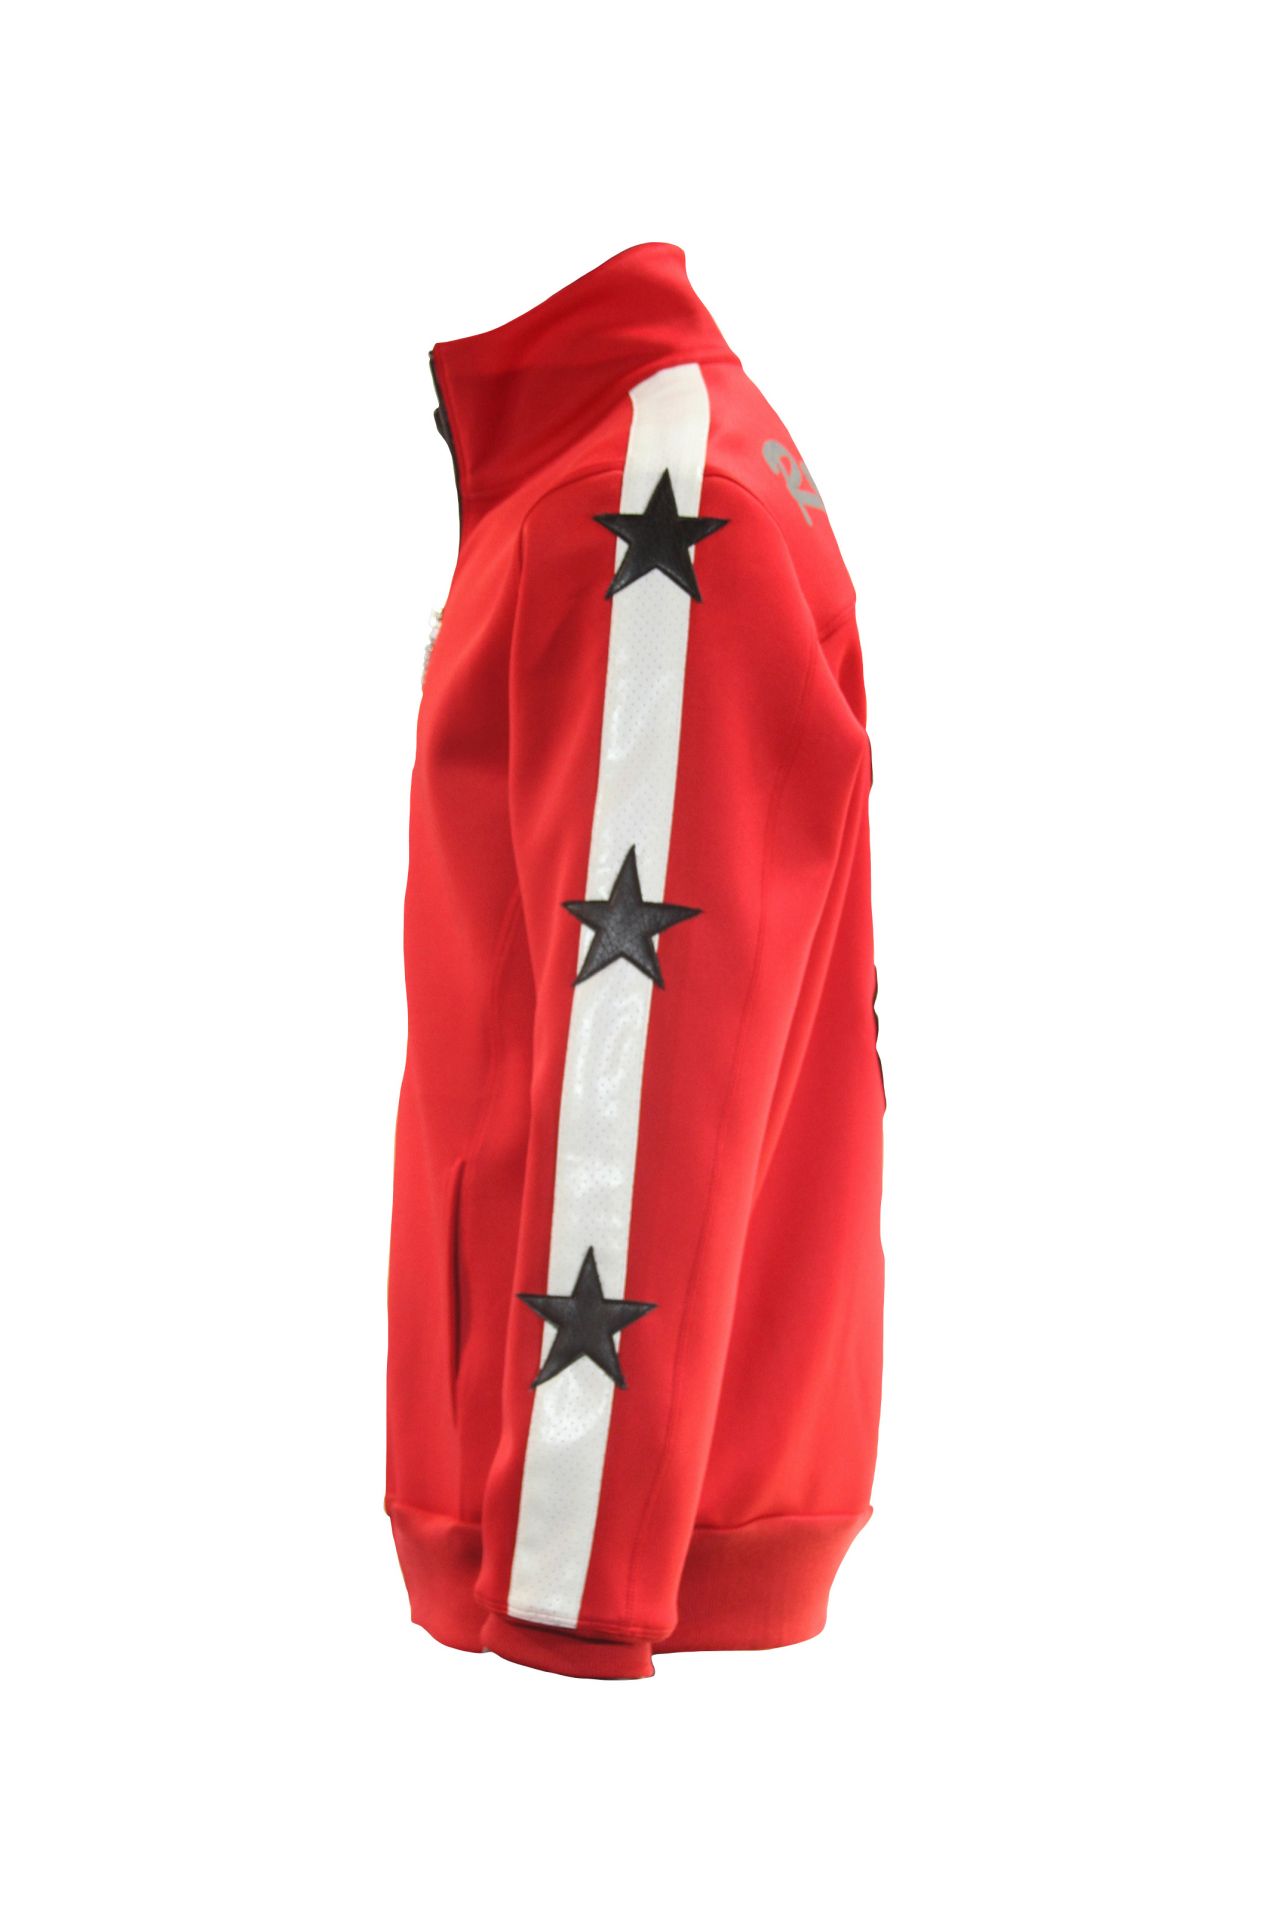 PATCHWORK STARS AND STRIPES JACKET IN RED